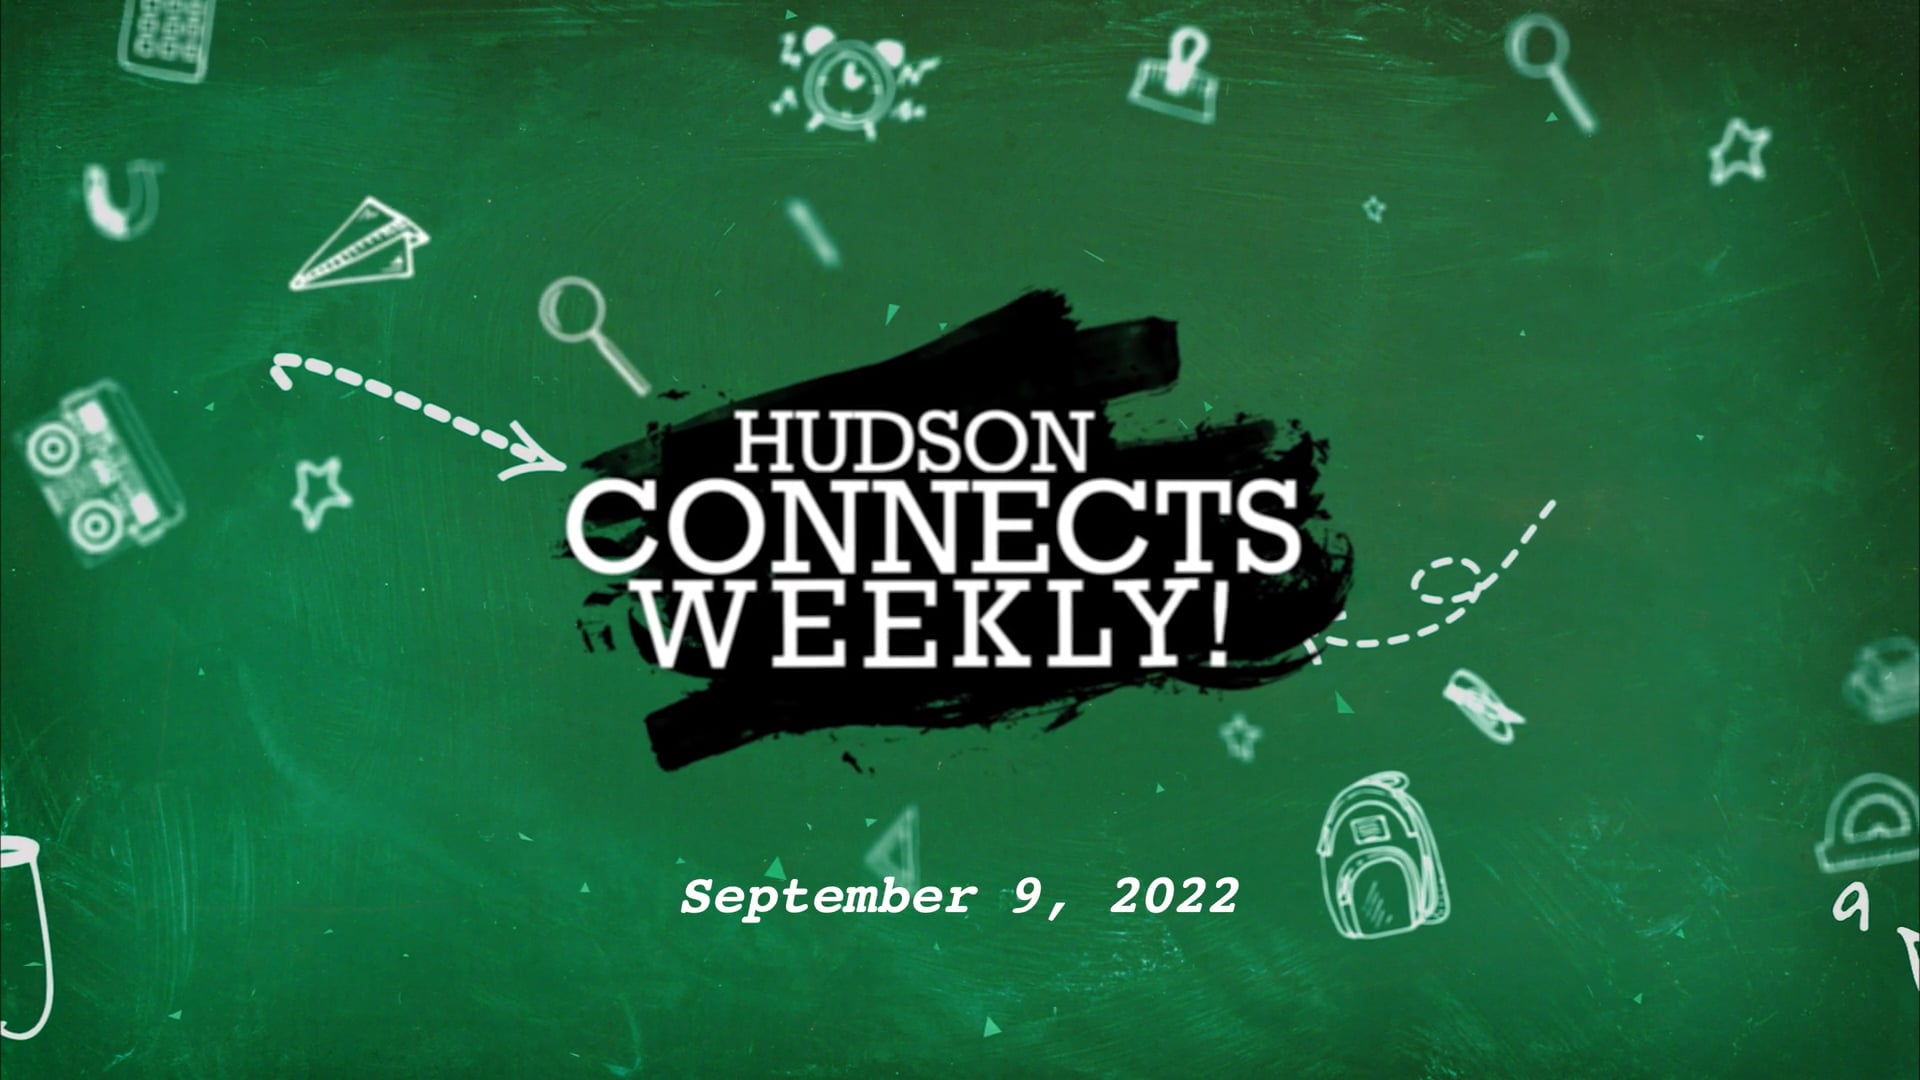 Hudson Connects Weekly - September 9, 2022